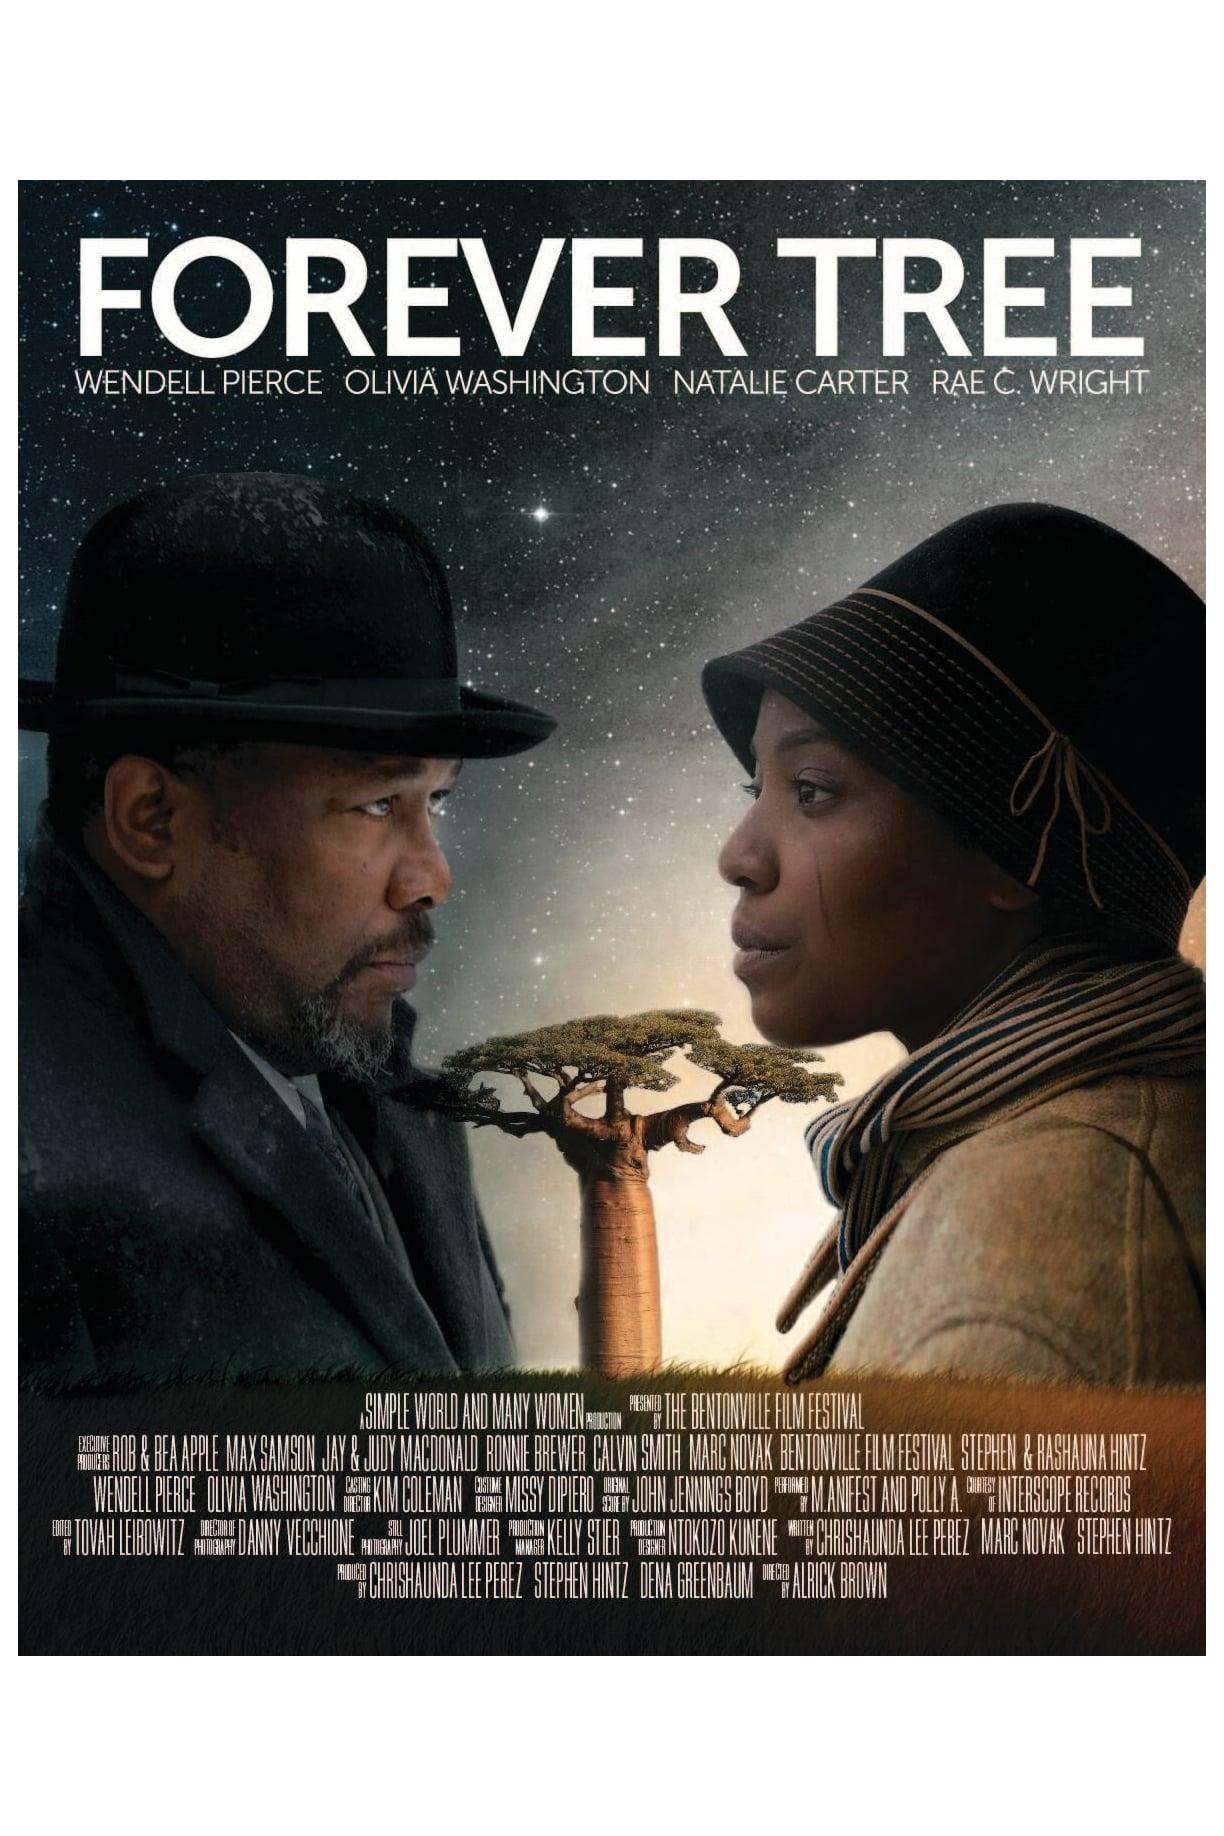 The Forever Tree poster